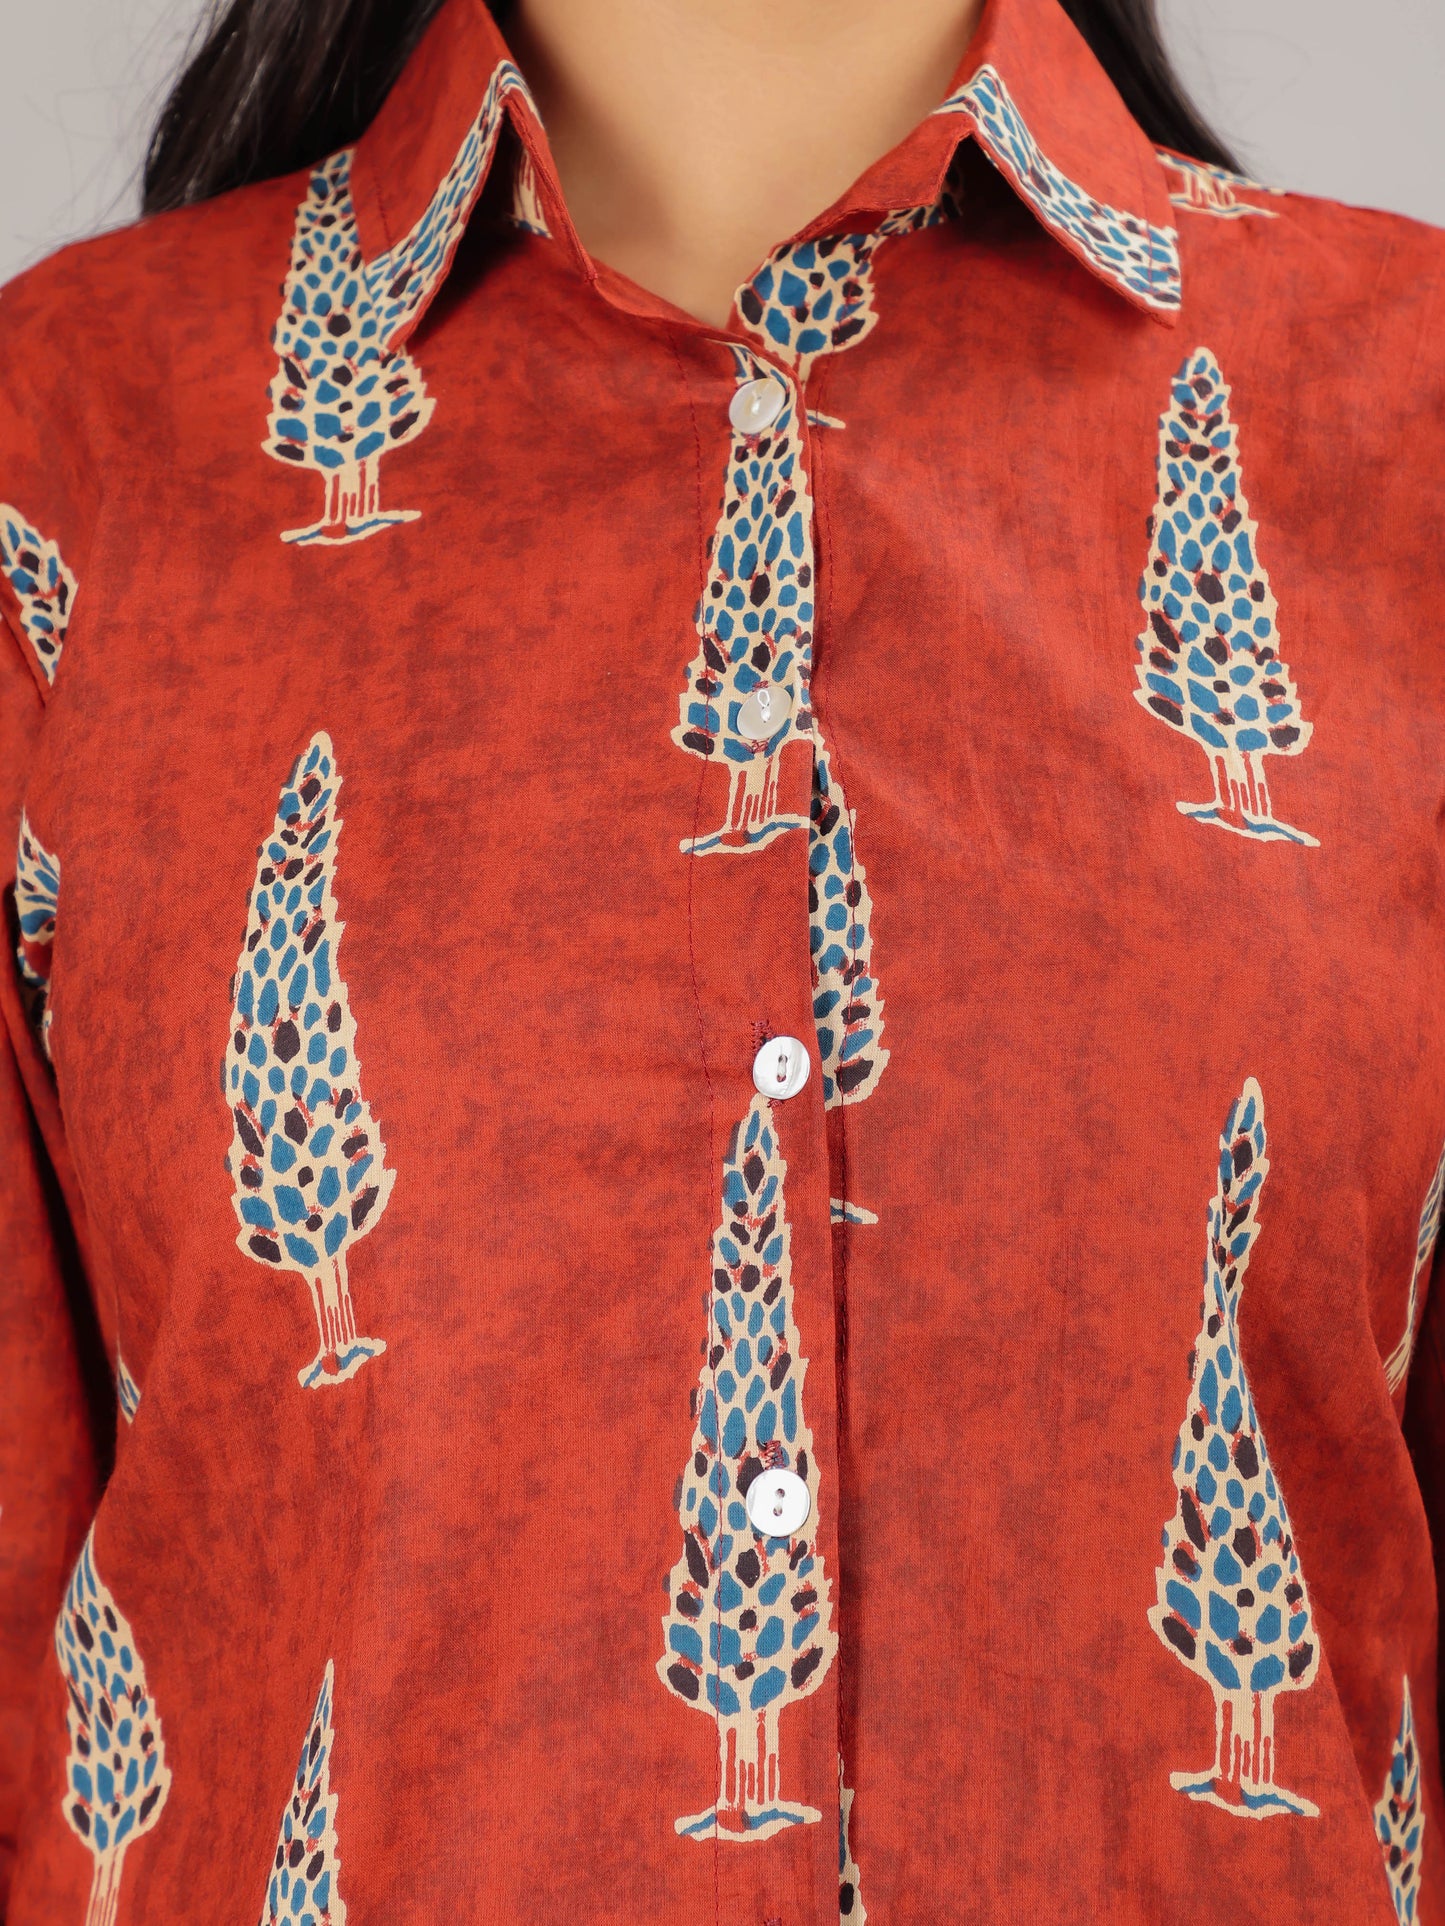 Mughal Print on Red Cotton Shirt Set for Women